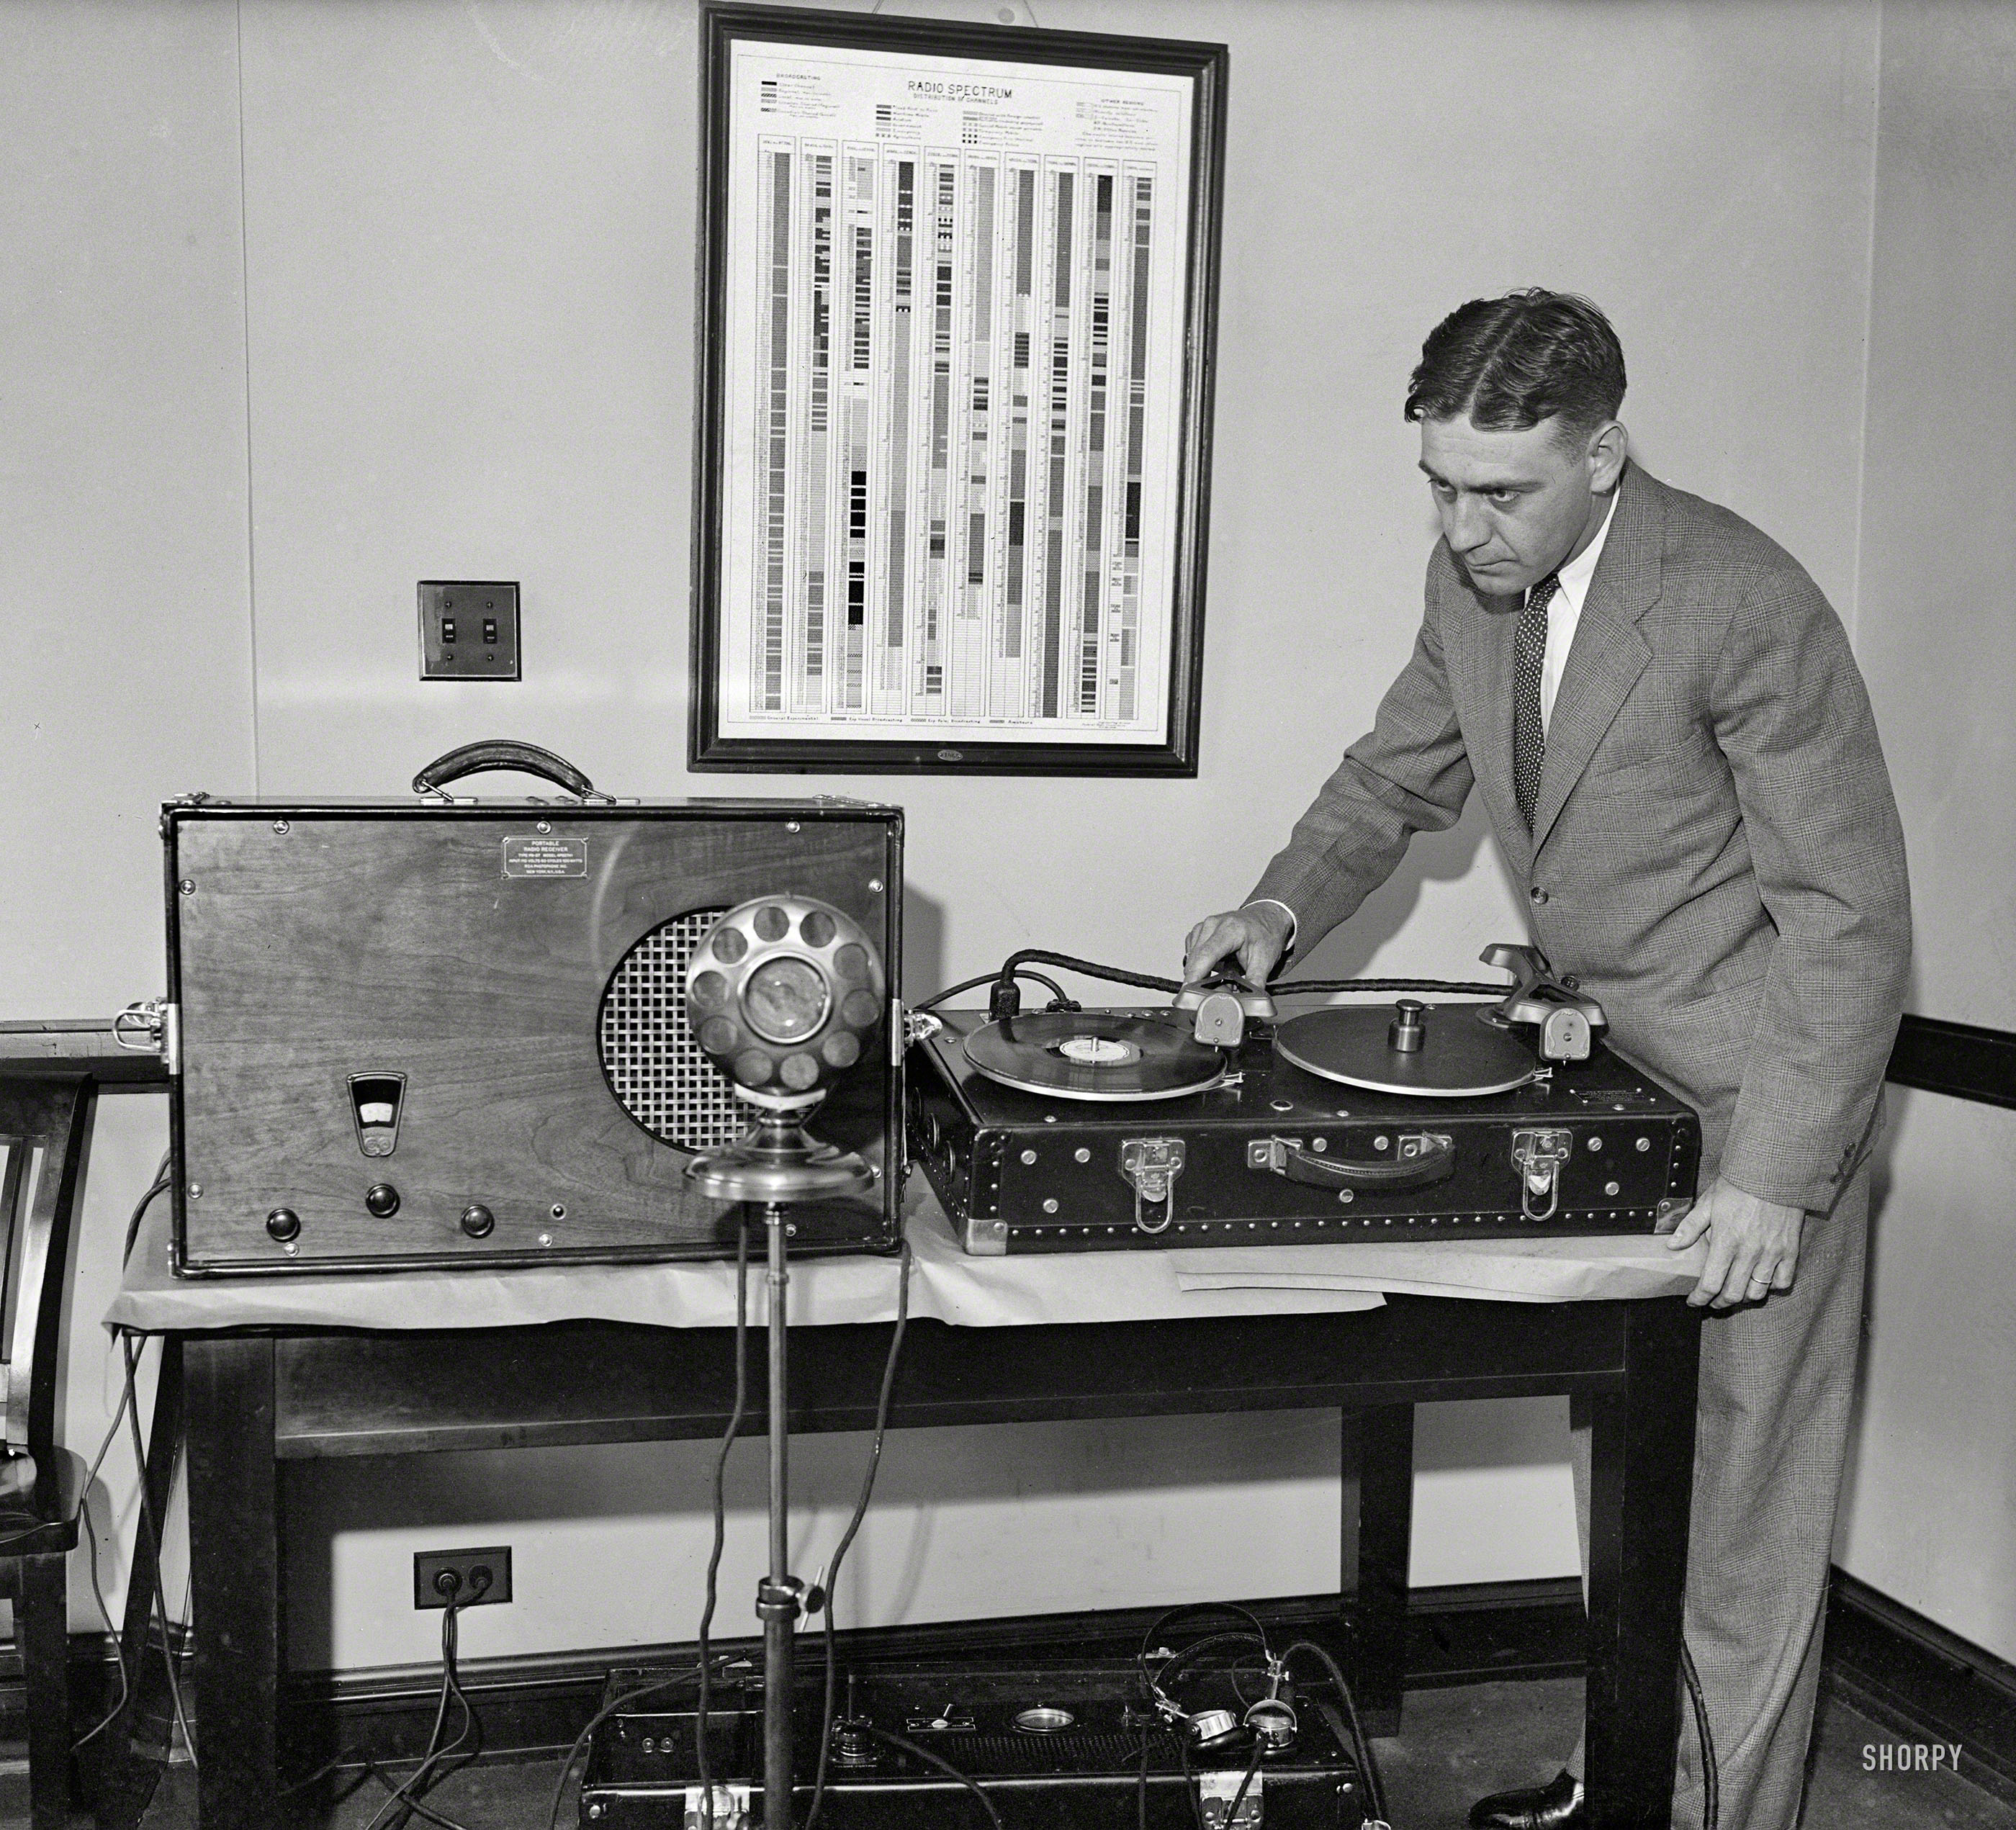 Washington, D.C., 1931. "Man with portable radio receiver and phonograph." Who seems to be using the amplifier to play a record into a microphone. Note handy "Radio Spectrum" chart. Harris & Ewing glass negative. View full size.